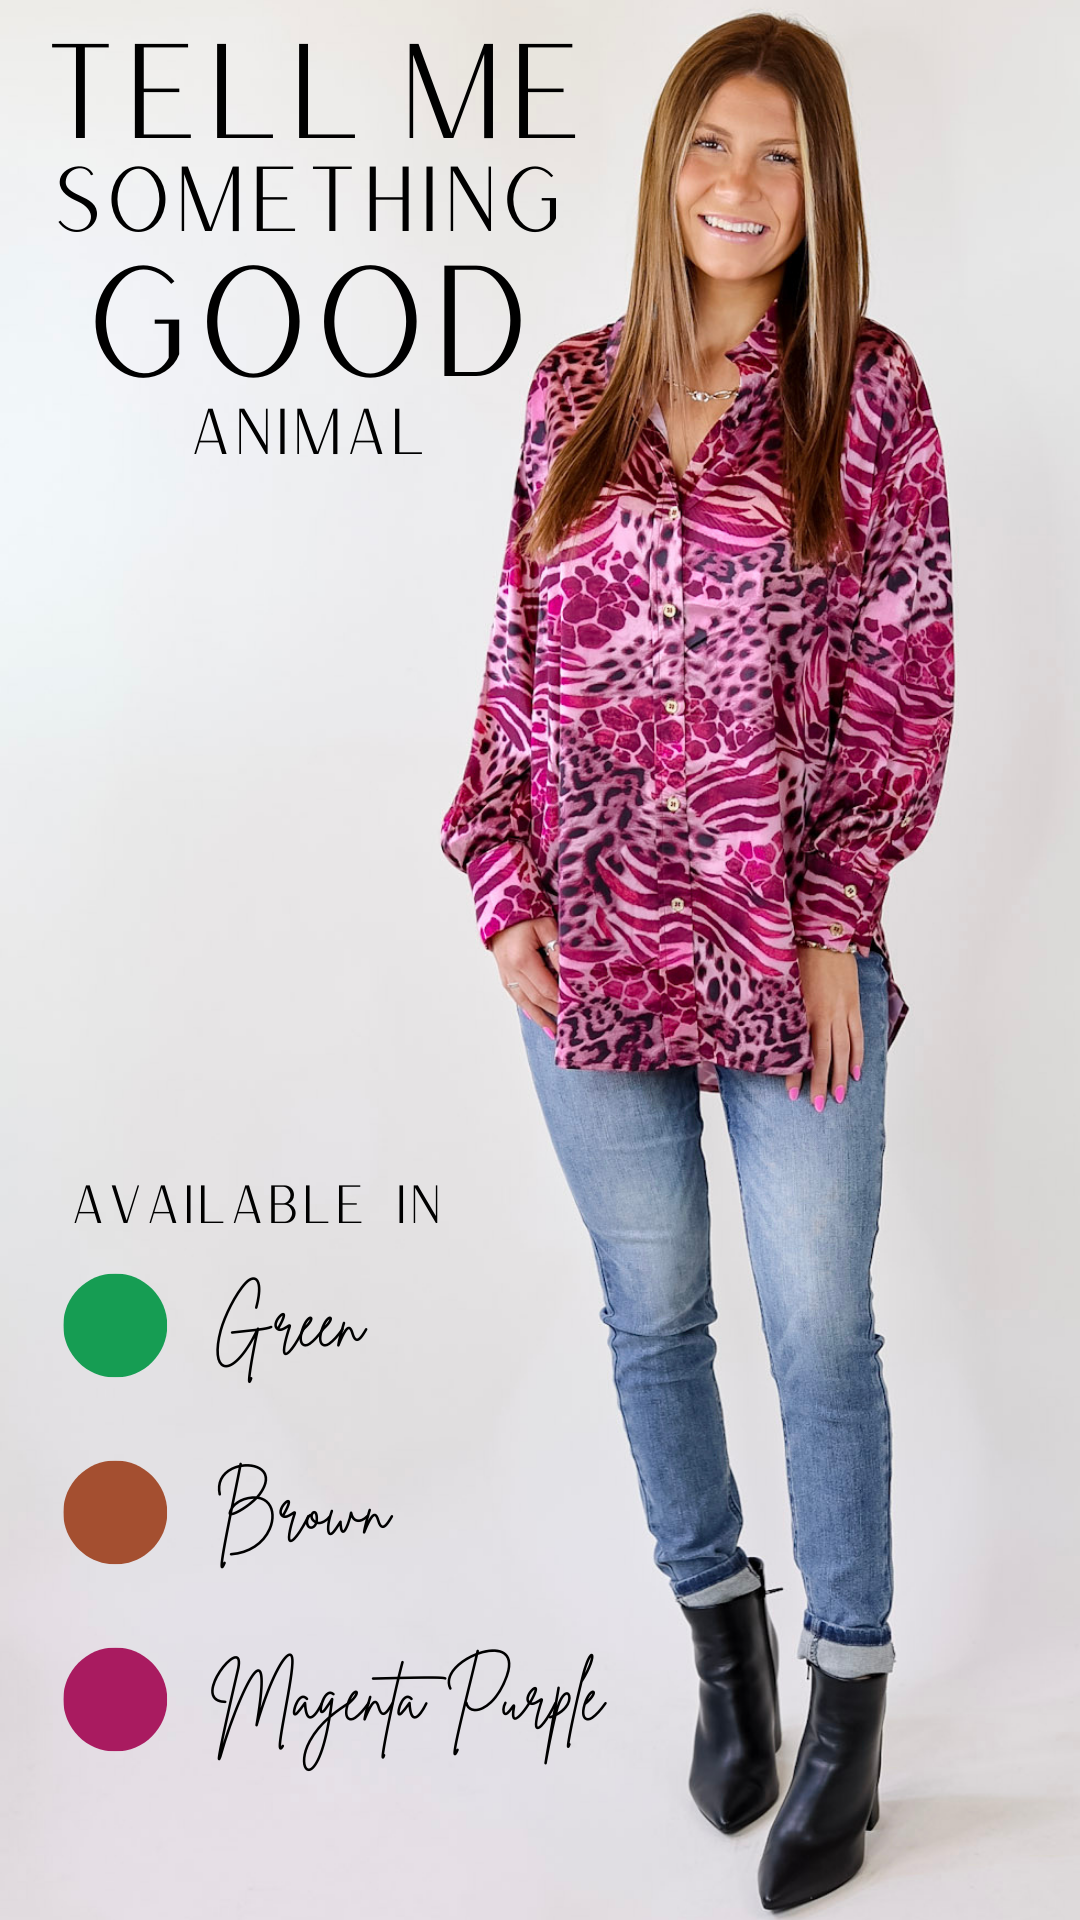 Tell Me Something Good Mixed Animal Print Long Sleeve Button Up Top in Magenta Purple